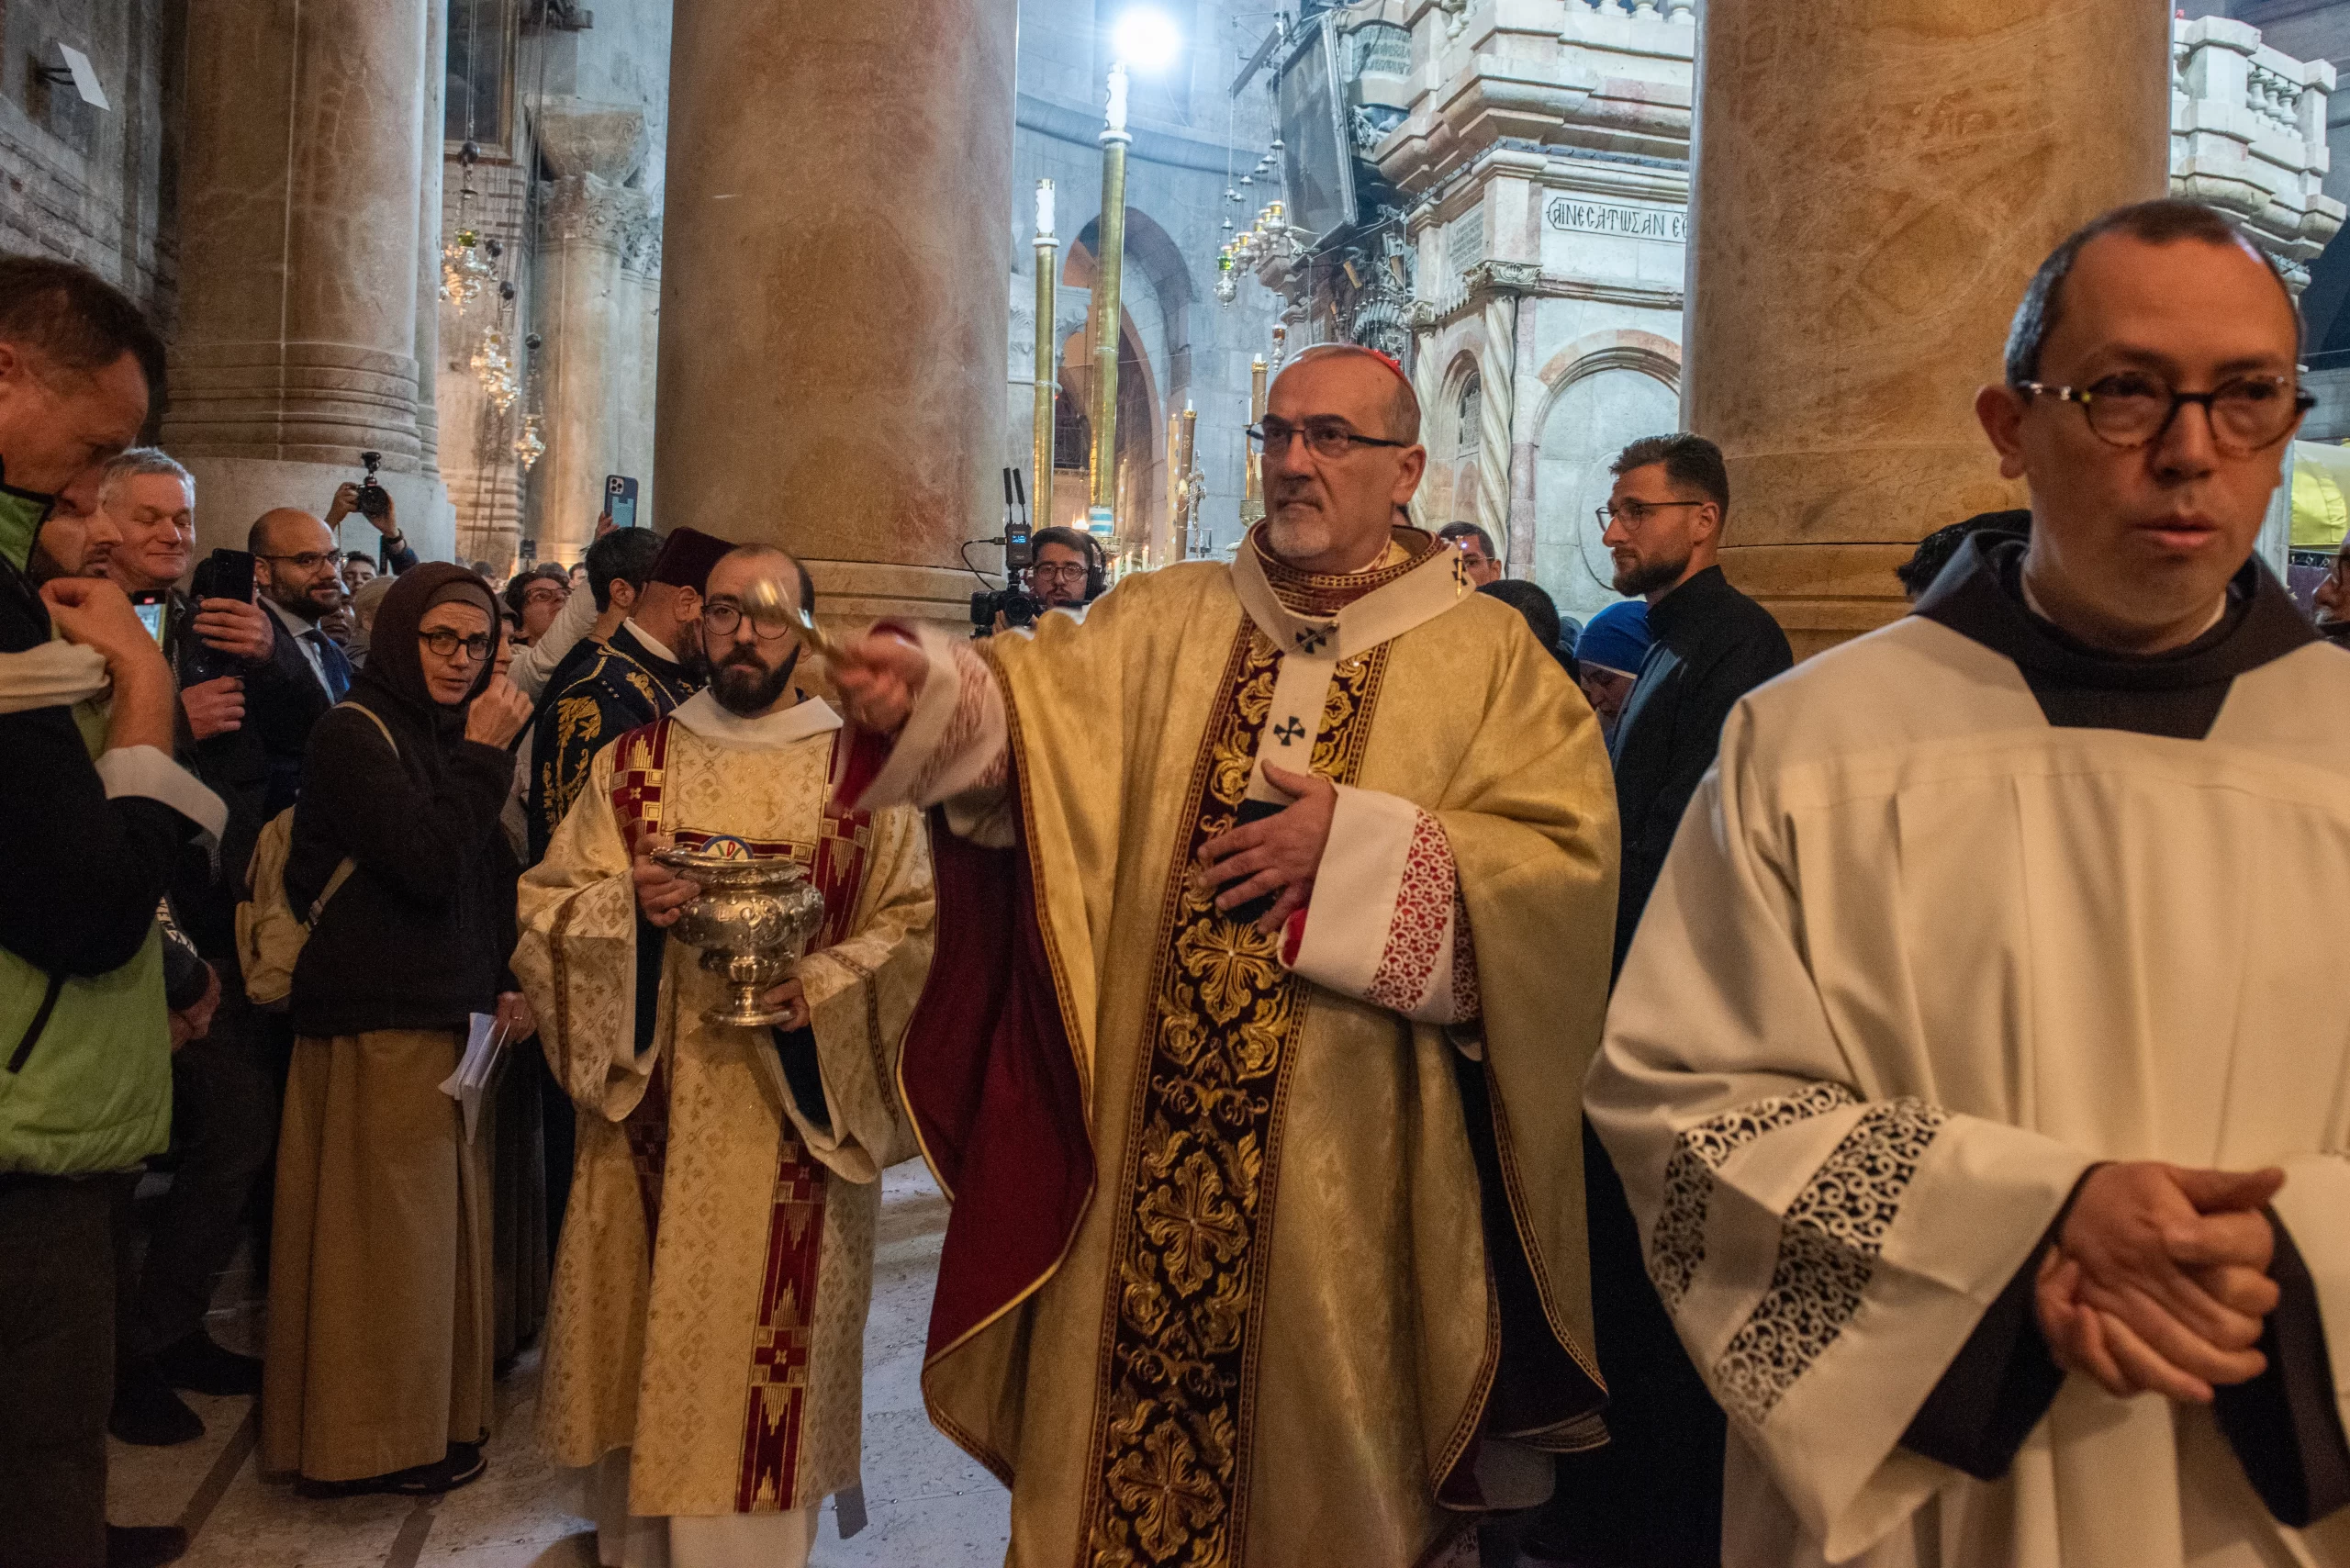 After blessing the water, Cardinal Pierbattista Pizzaballa, the Latin patriarch of Jerusalem, blesses the faithful during the Easter Vigil, celebrated on the morning of Saturday, March 30, 2024, in the Basilica of the Holy Sepulcher in Jerusalem. Credit: Marinella Bandini